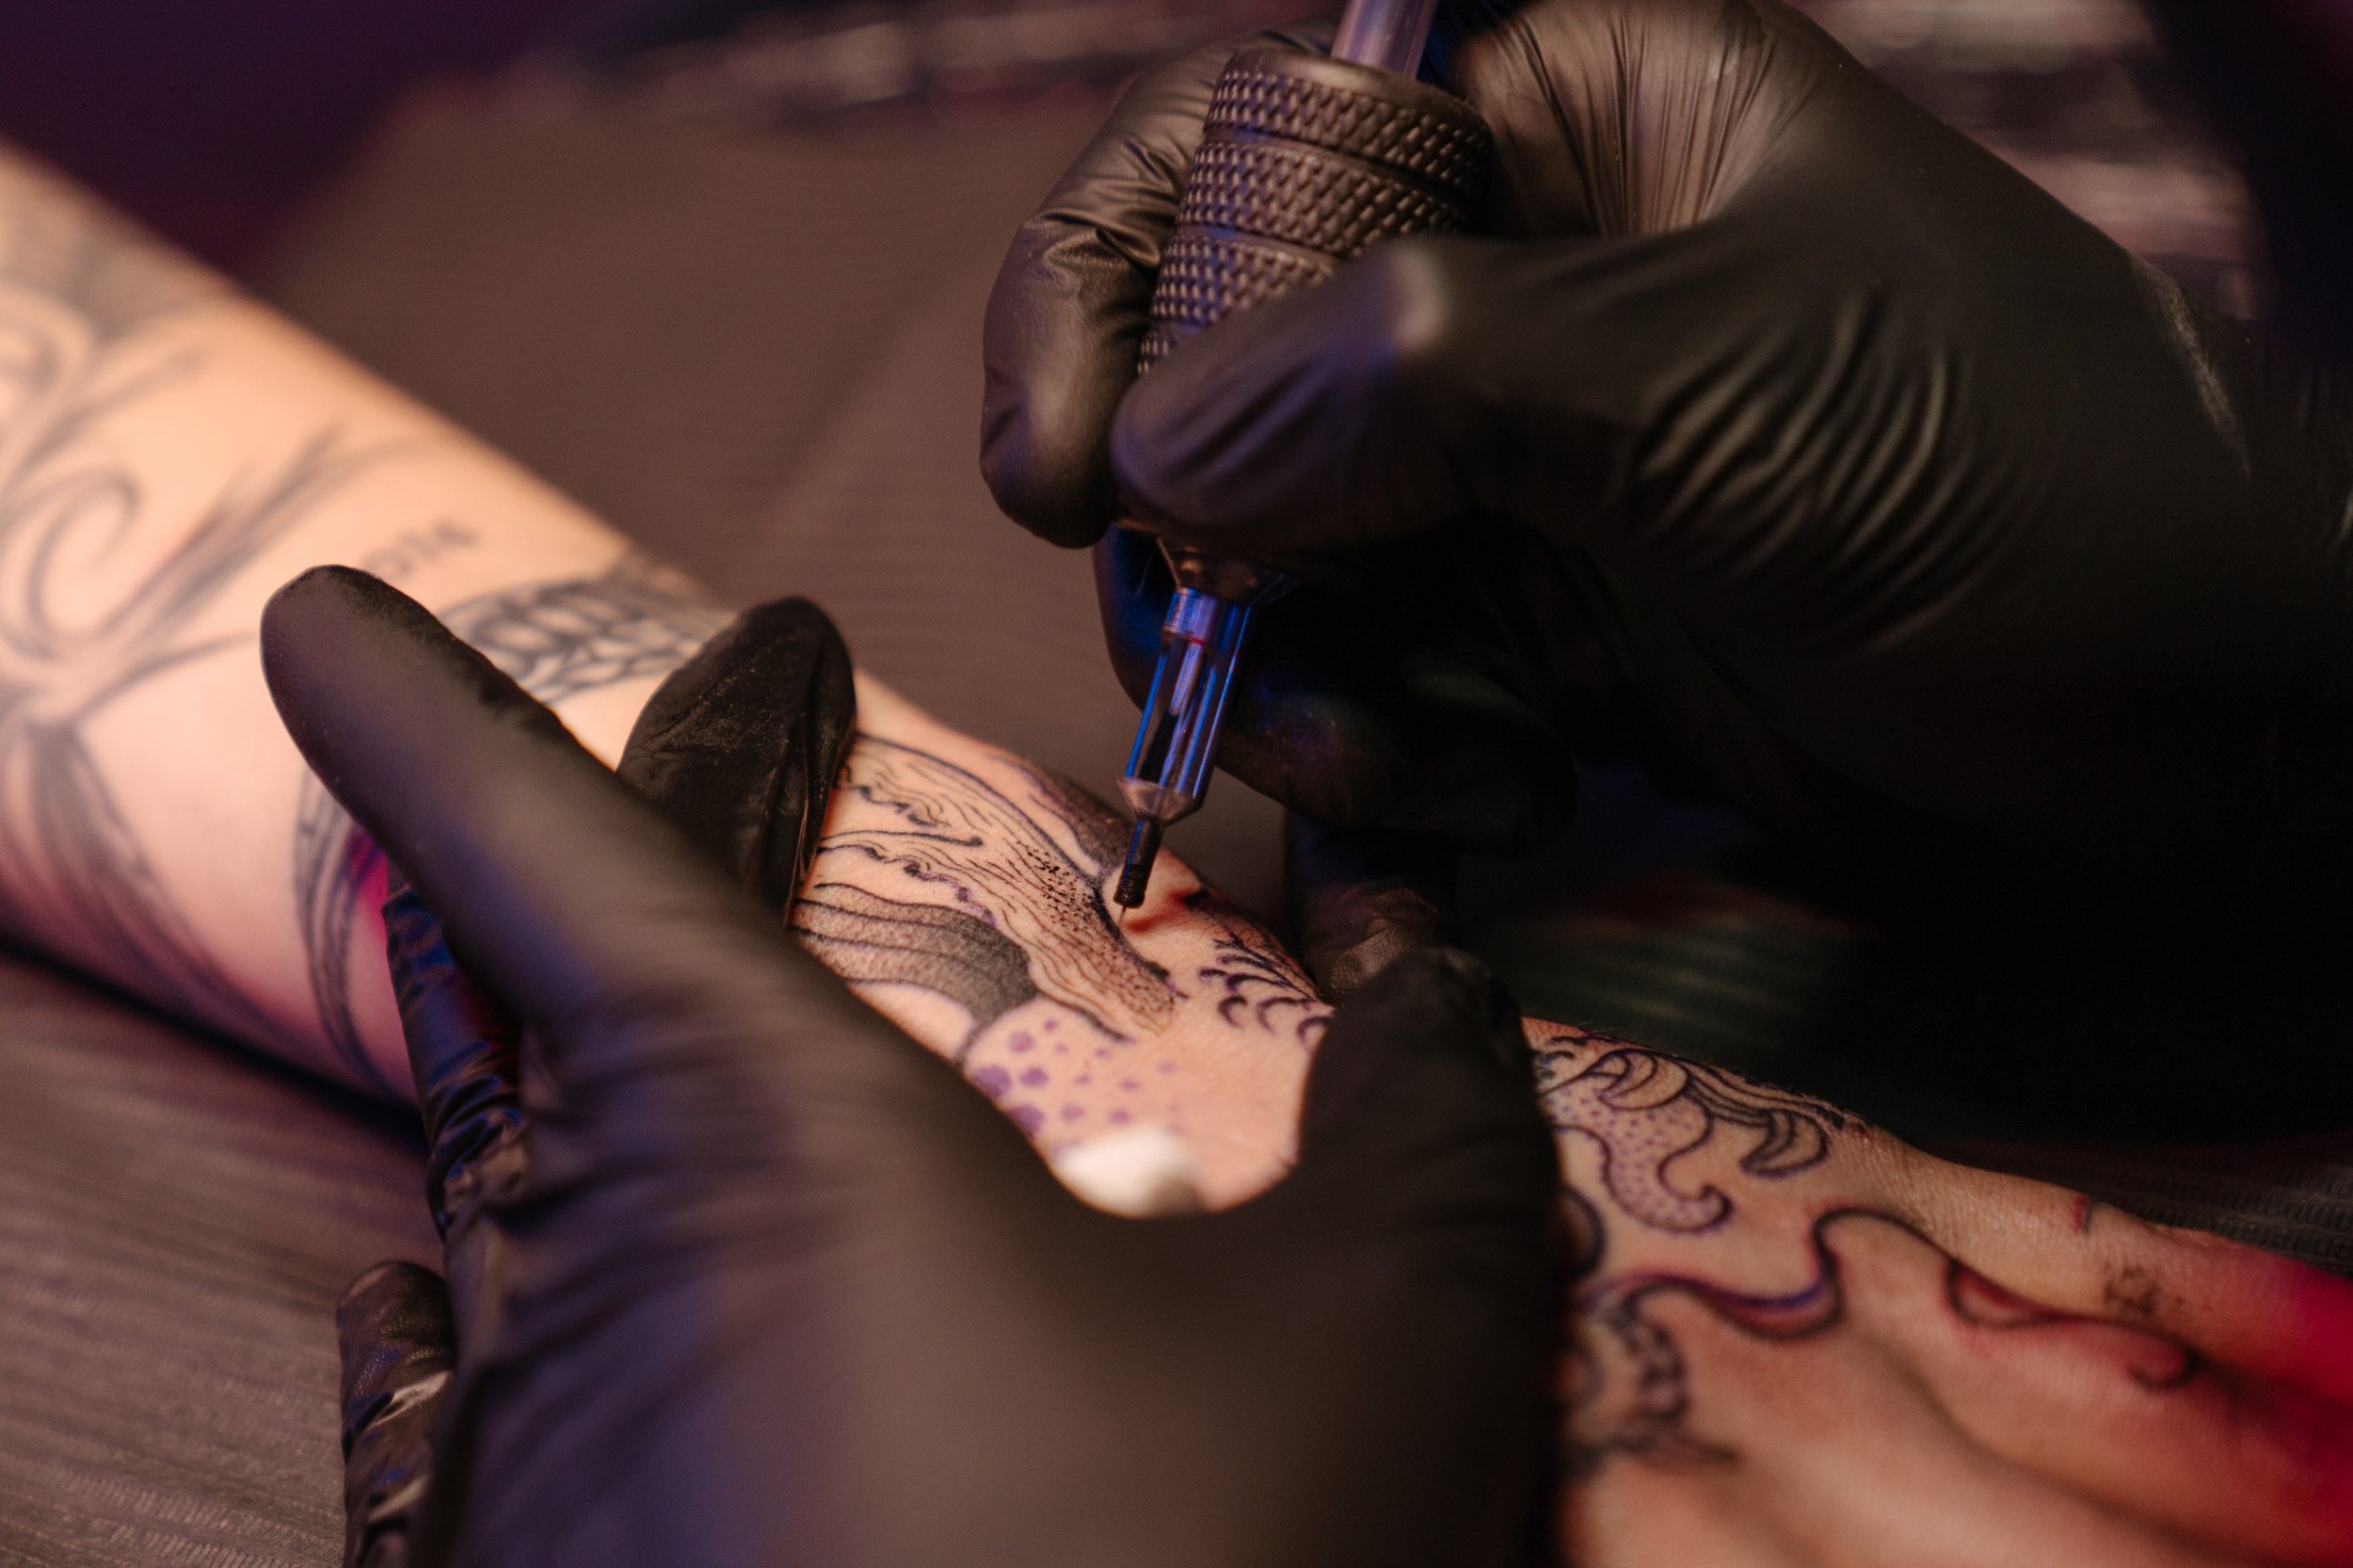 InkPulse - We believe anyone can become a tattoo artist. We offer various  tattoo courses from basic to advance tattooing. Make a career in tattooing,  Learn to tattoo! Call us at :